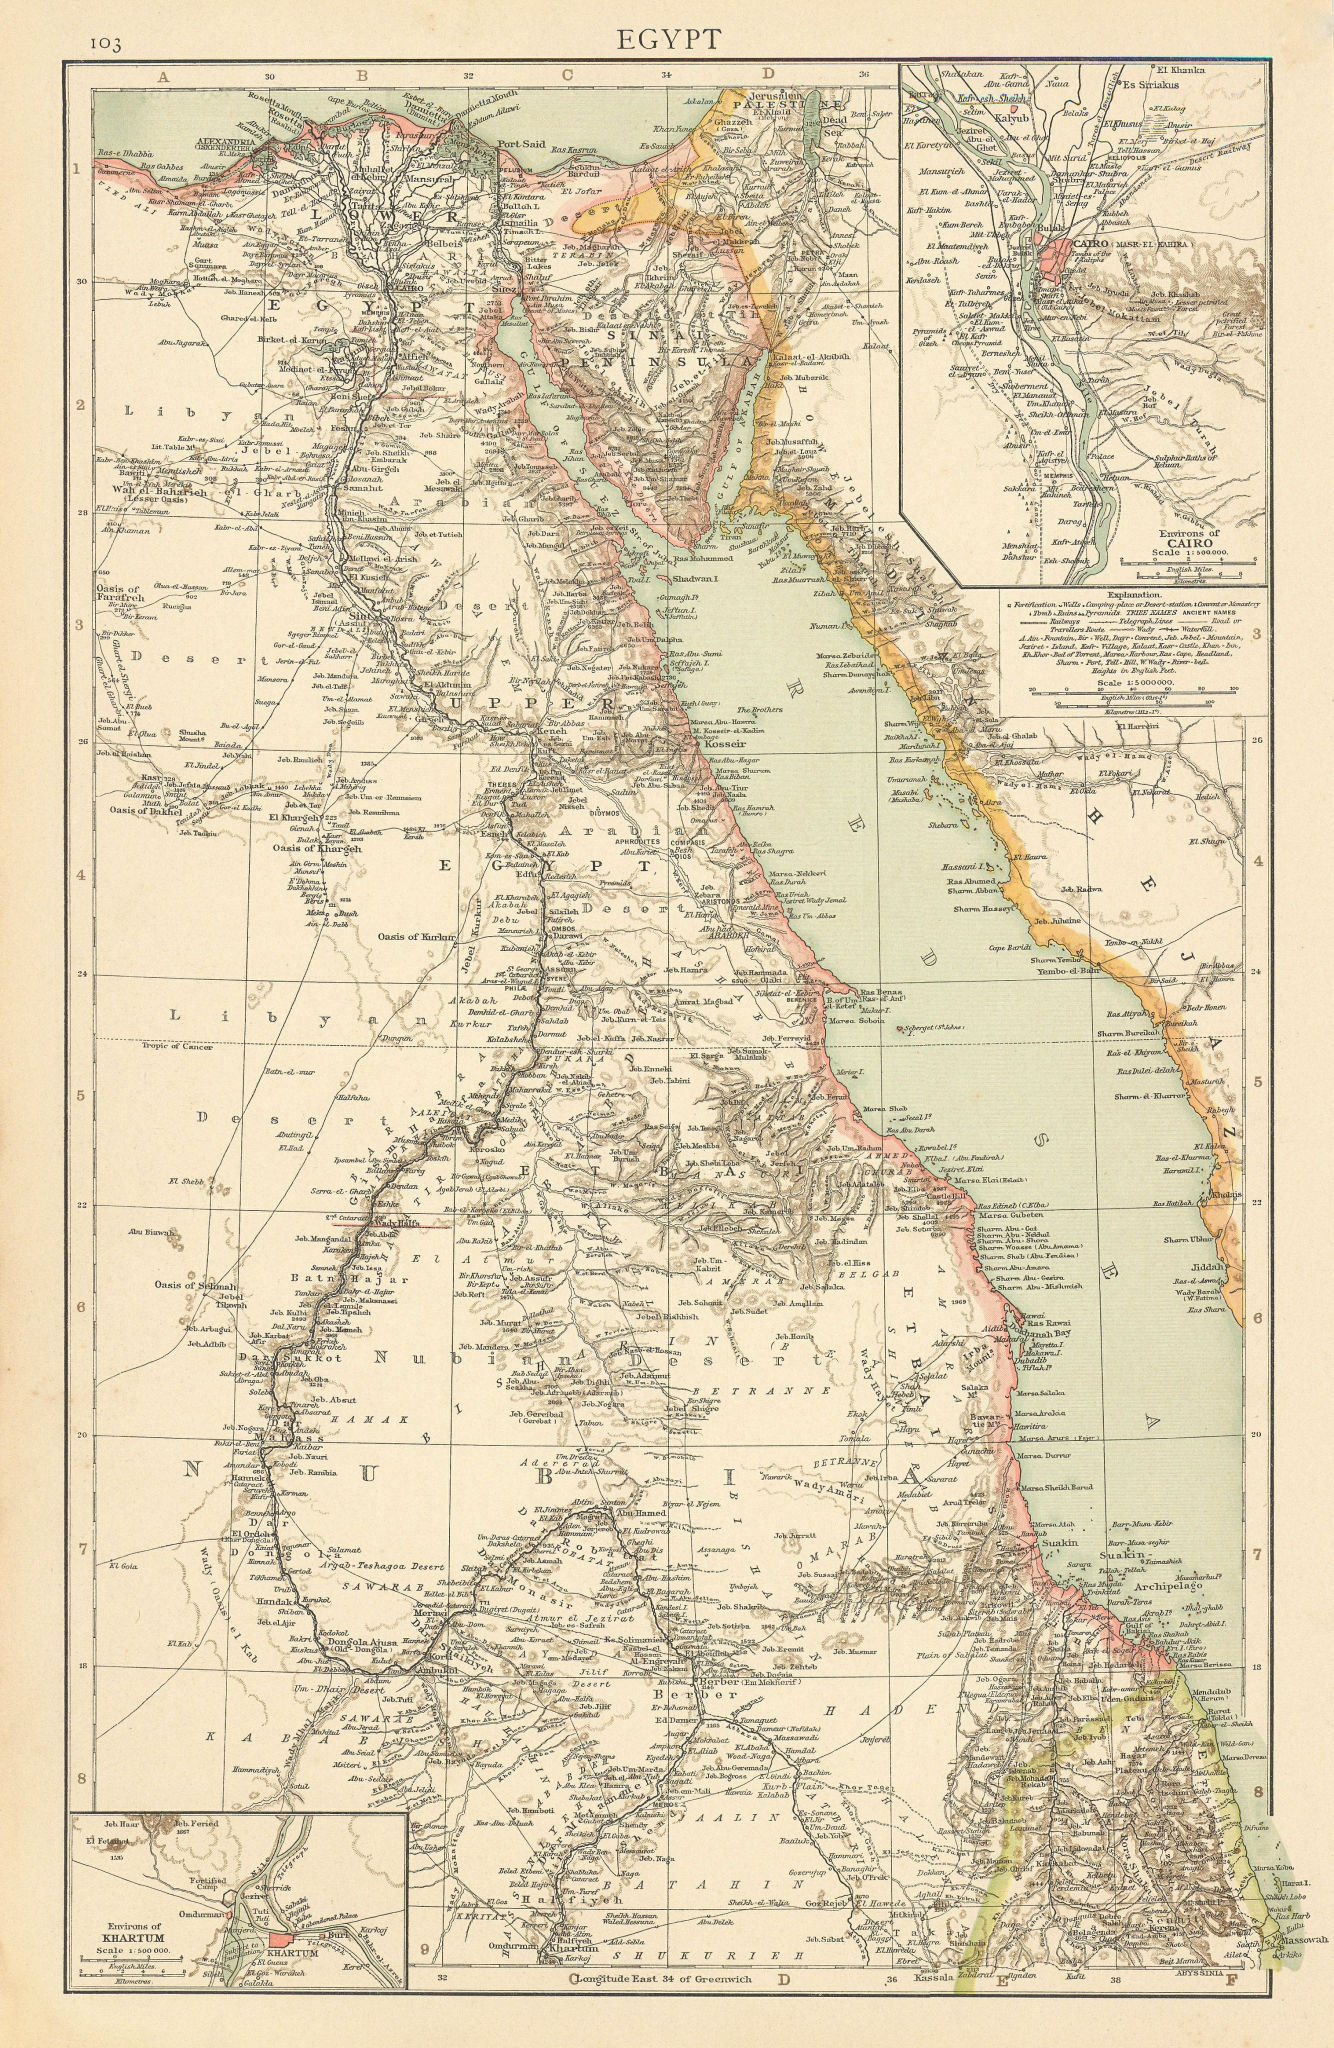 Associate Product Egypt. Nile Valley. Khartoum & Cairo environs. Red Sea. THE TIMES 1895 old map